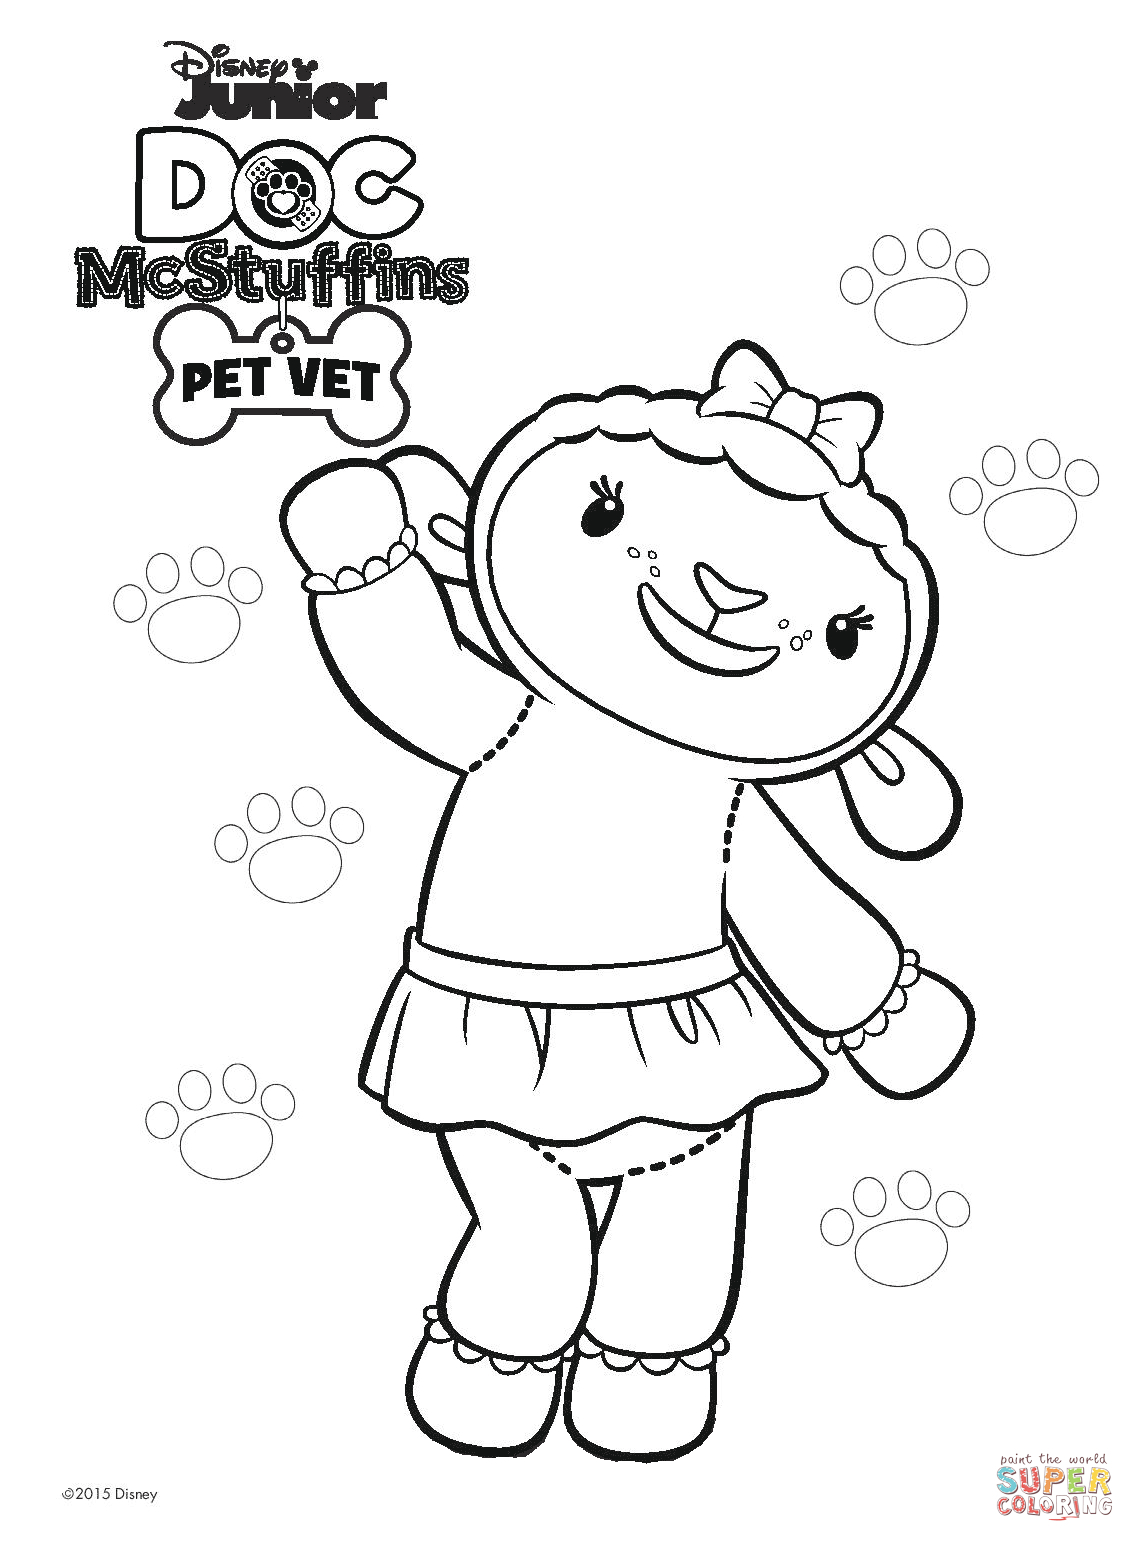 Doc Mcstuffins Coloring Pages Doc Coloring Pages At Getdrawings Free For Personal Use Doc